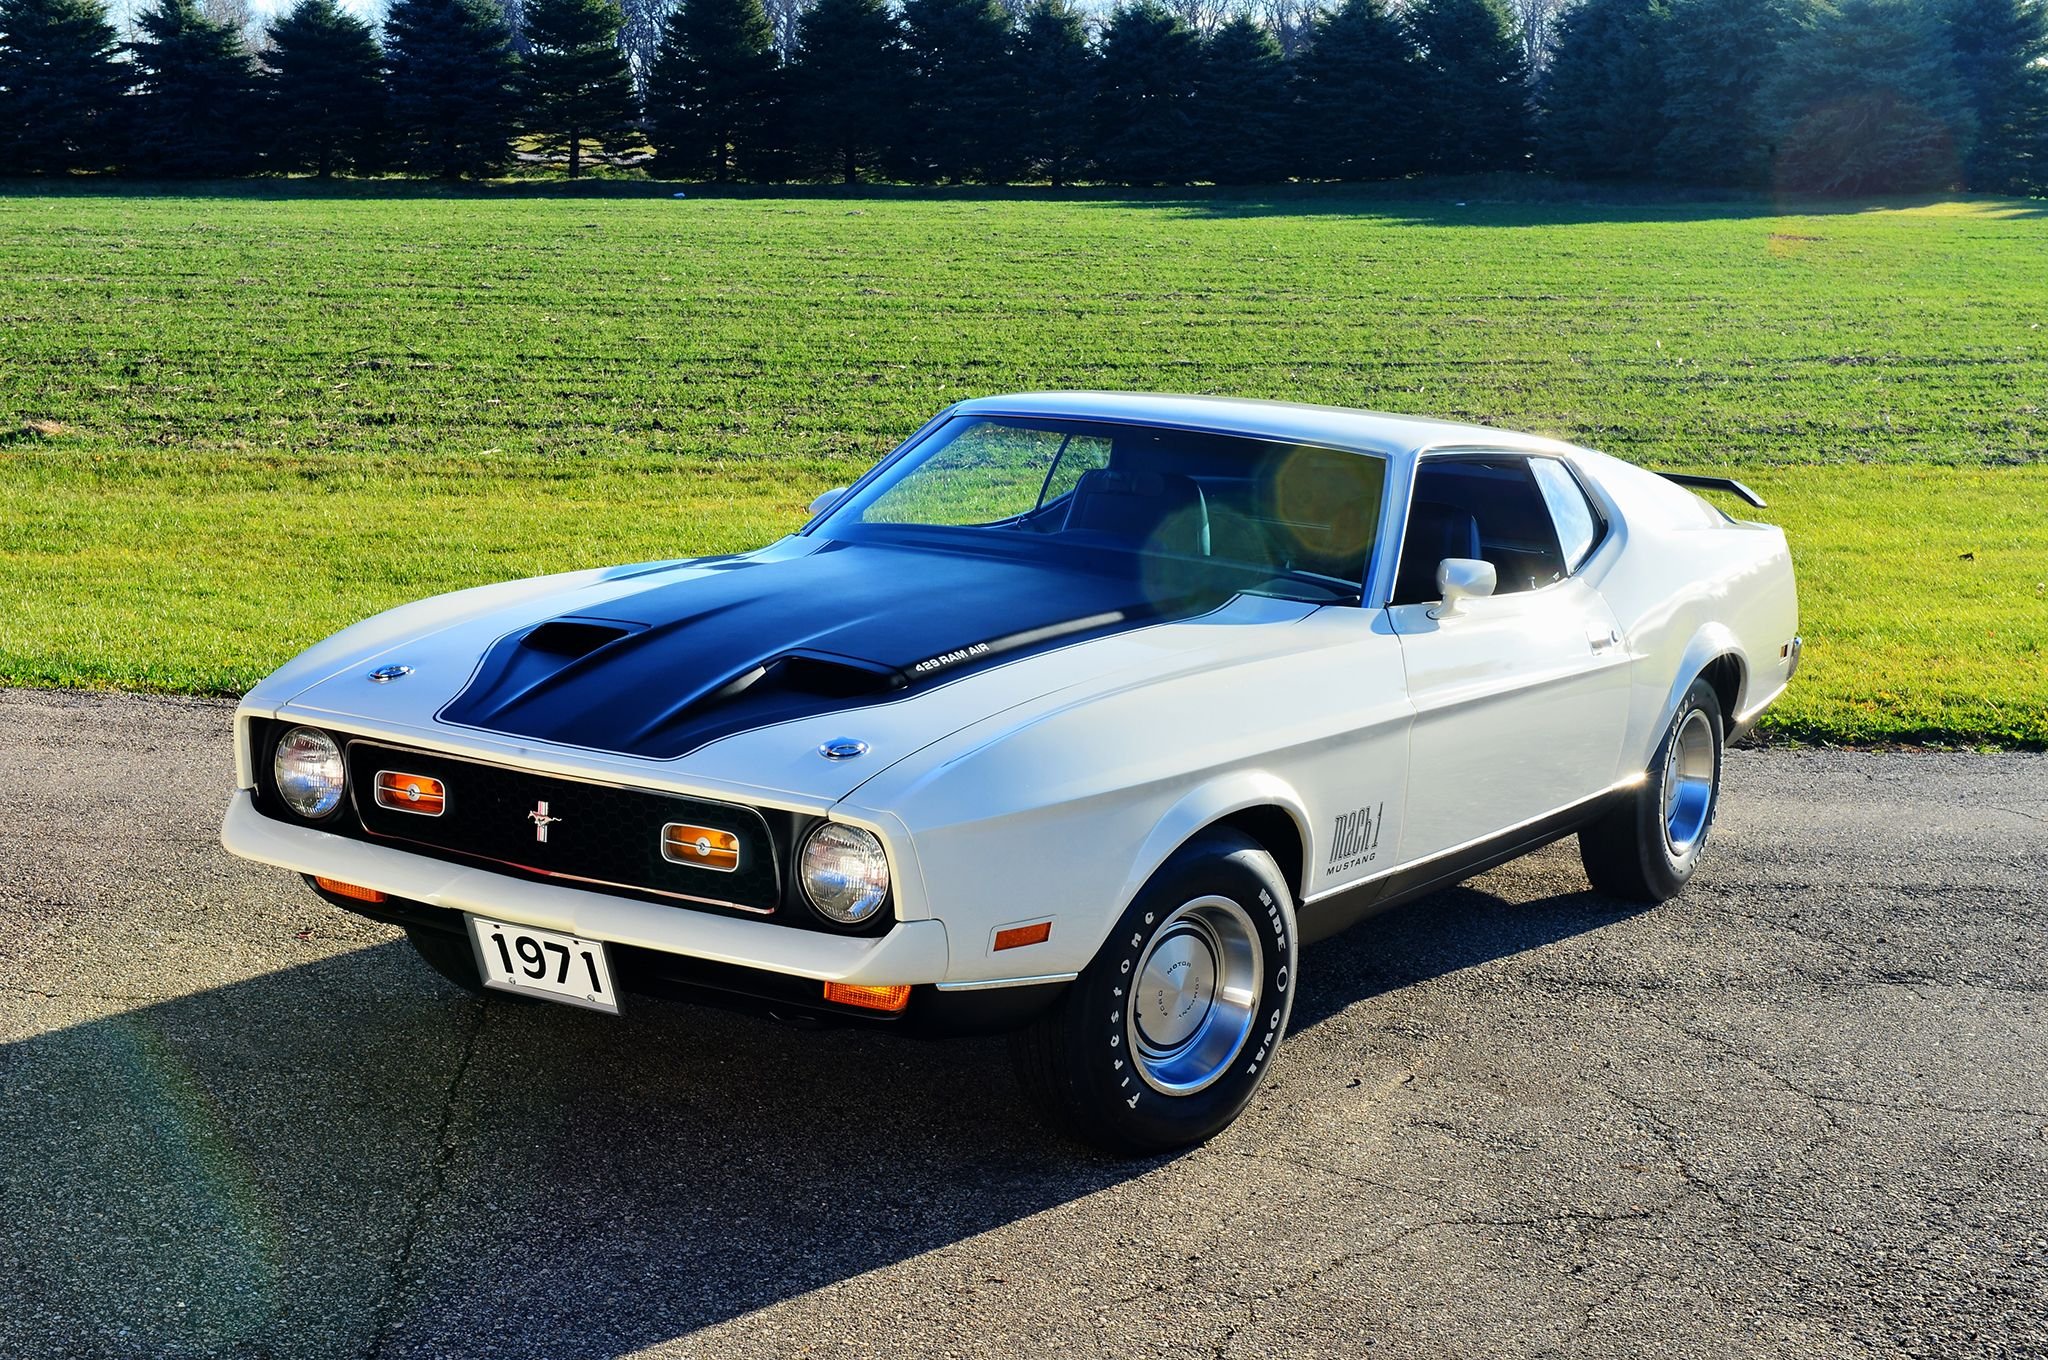 1971, Ford, Mustang, 429, Super, Cobra, Jet, Mach 1, Muscle, Classic ...